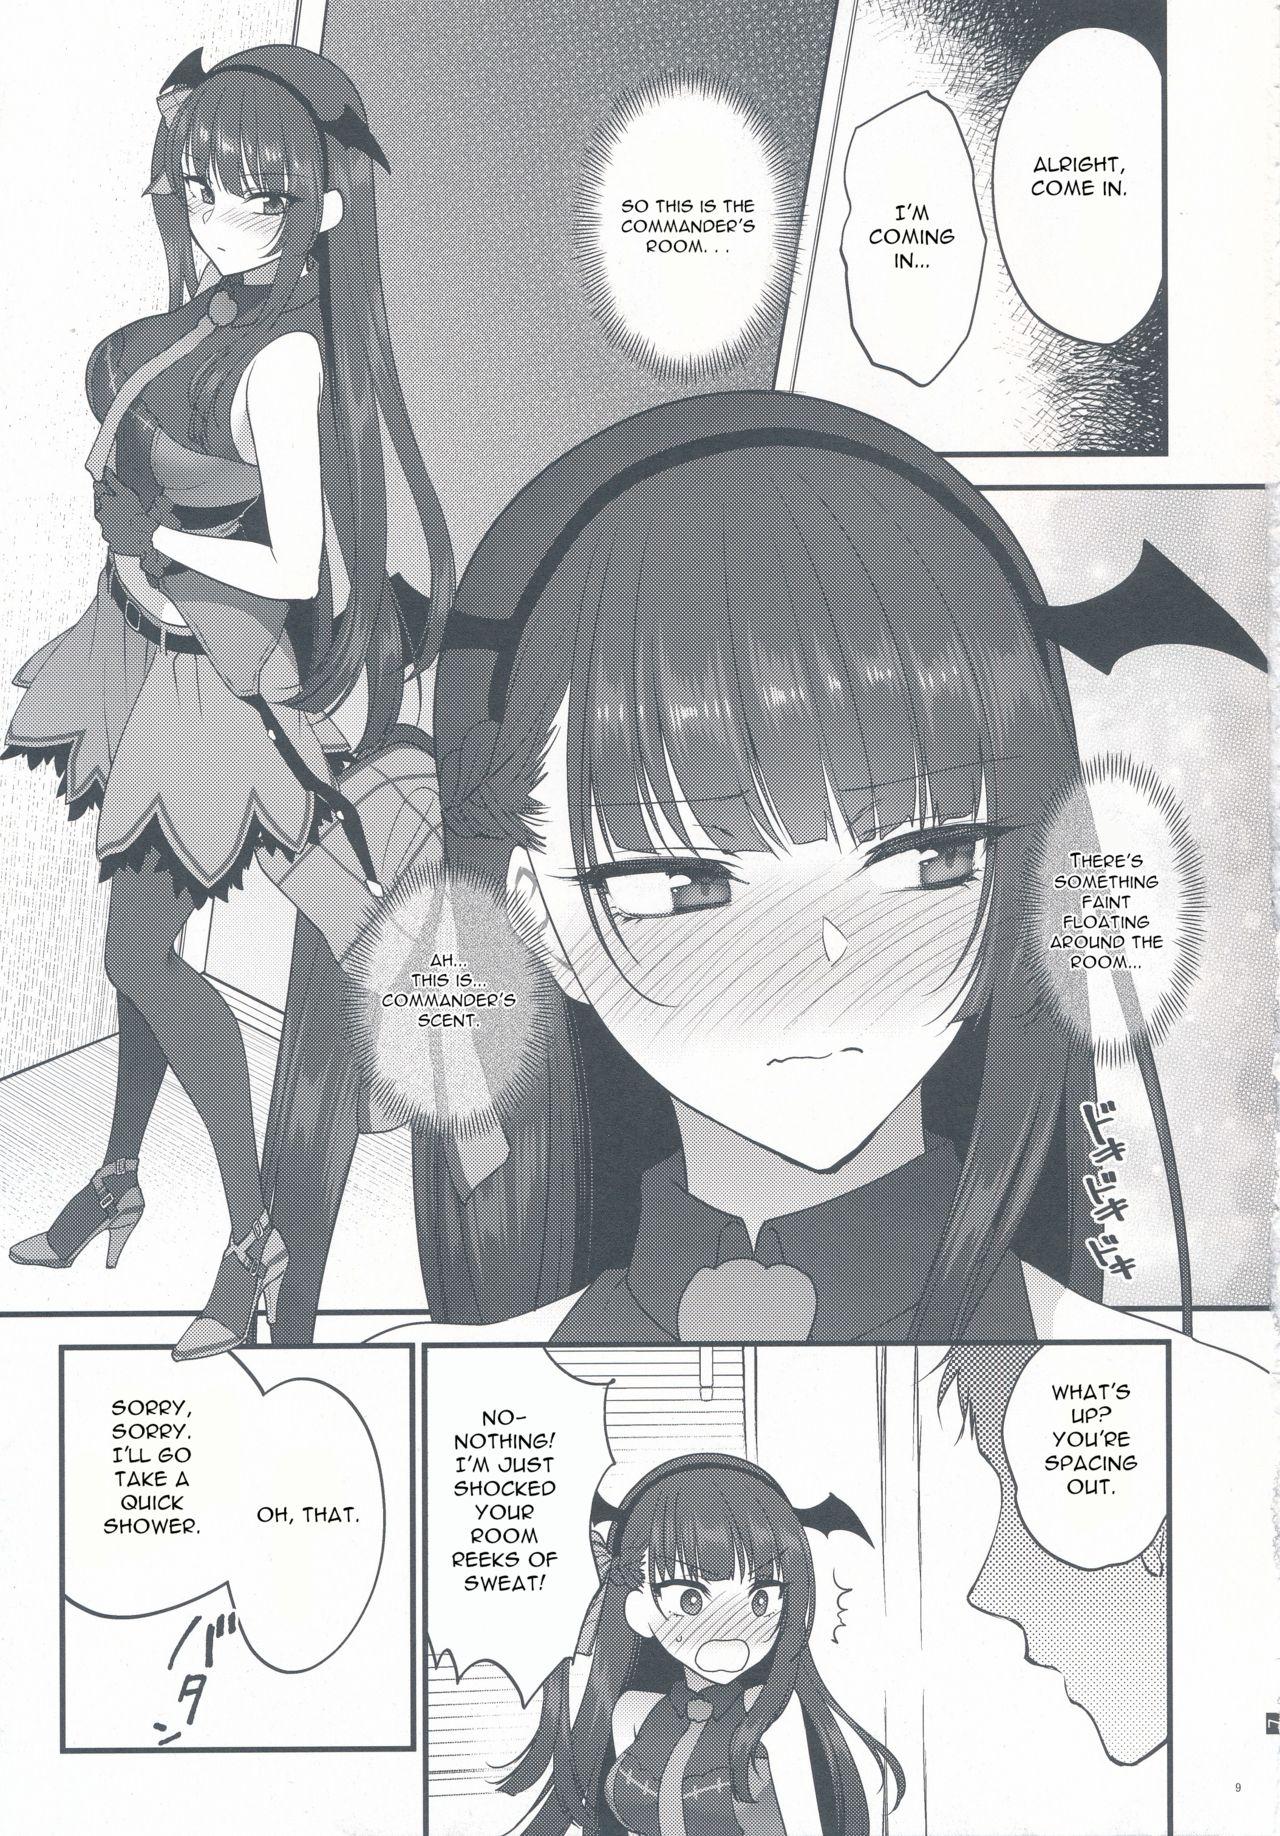 Caught Obake nante Inai! - Girls frontline Amateurs Gone - Page 9